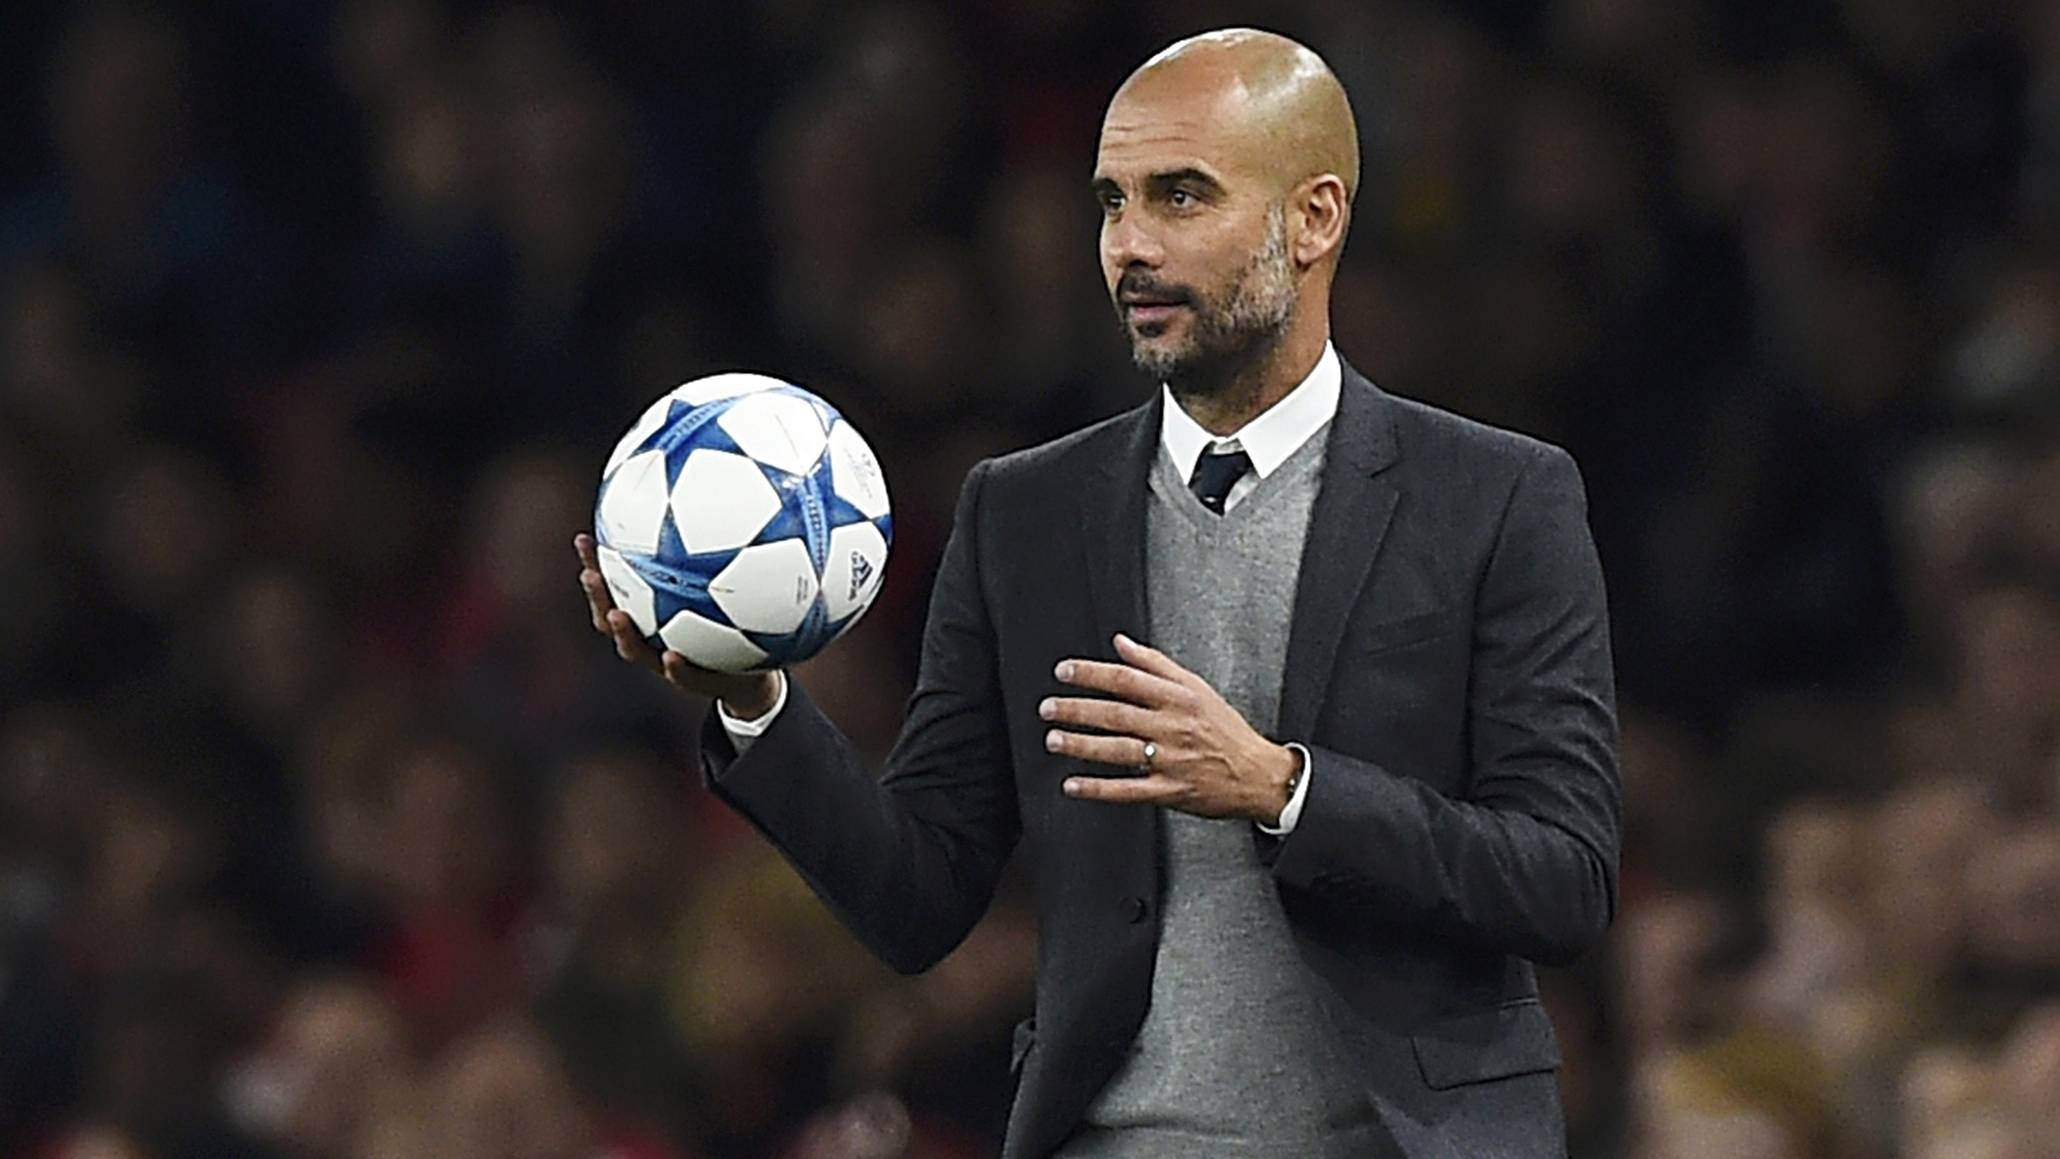 Pep Guardiola has not had seurte in several traspasos sounded